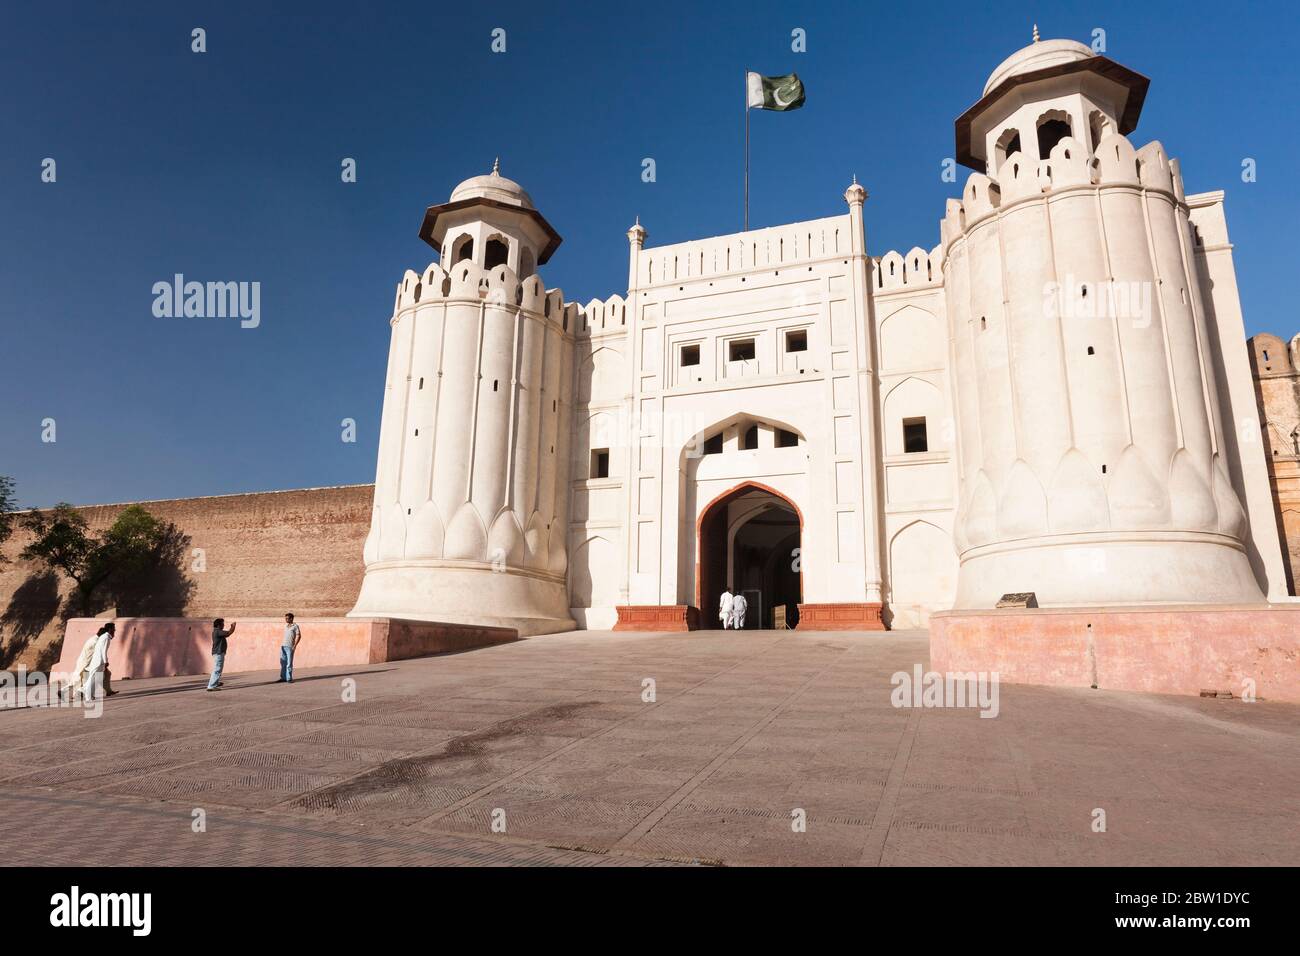 Alamgiri Gate of Lahore Fort, Citadel of Mughal Empire, Islamic and Hindu architecture,  Lahore, Punjab Province, Pakistan, South Asia, Asia Stock Photo